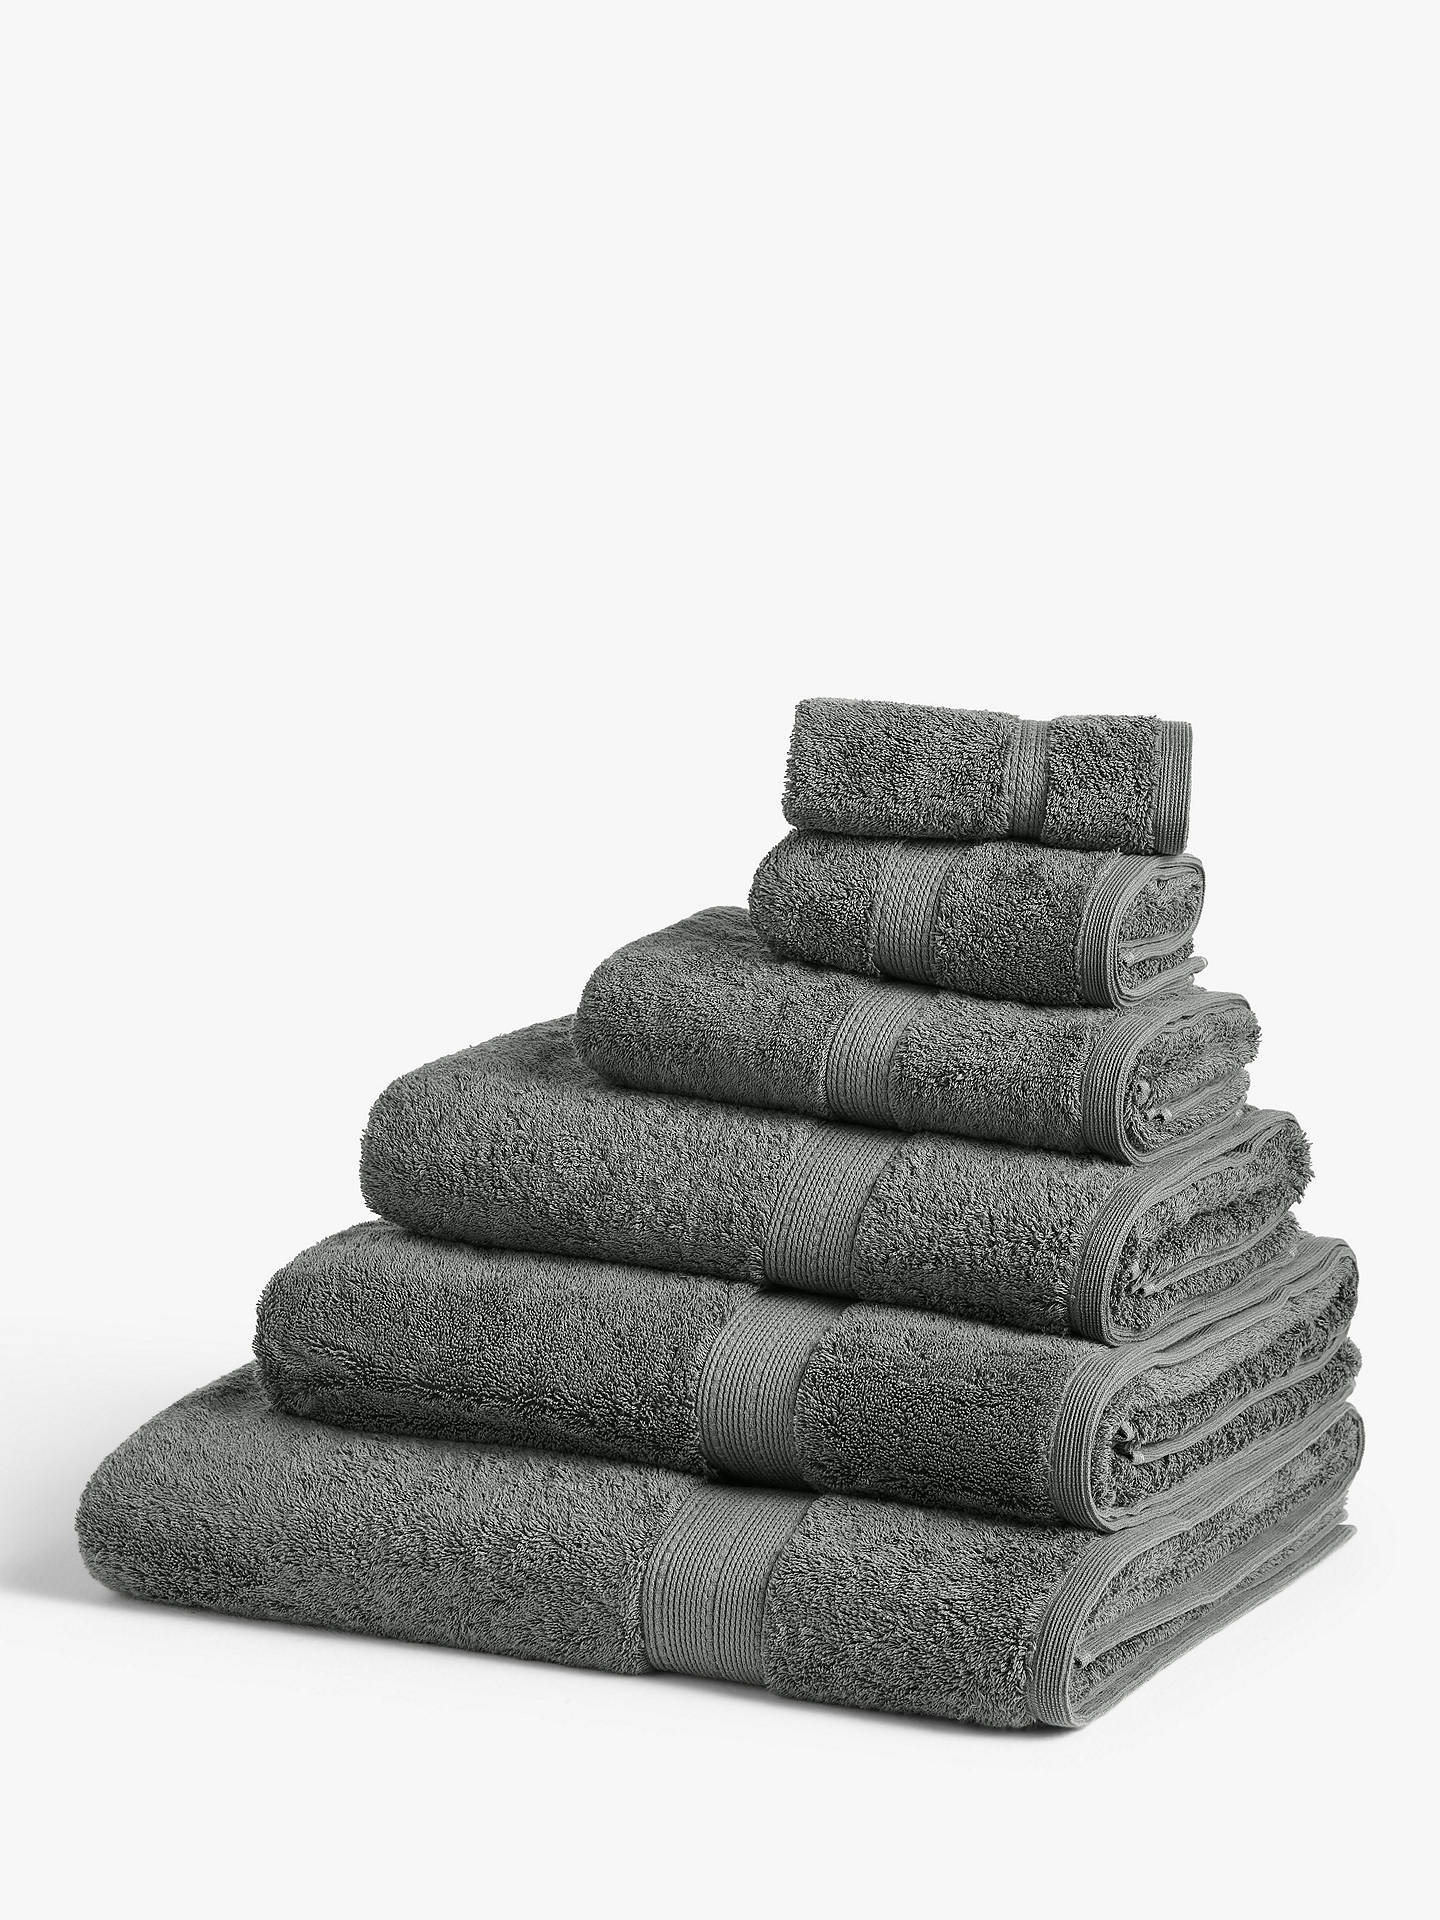 John Lewis & Partners Silky Suvin Cotton Towels | Dove at ...